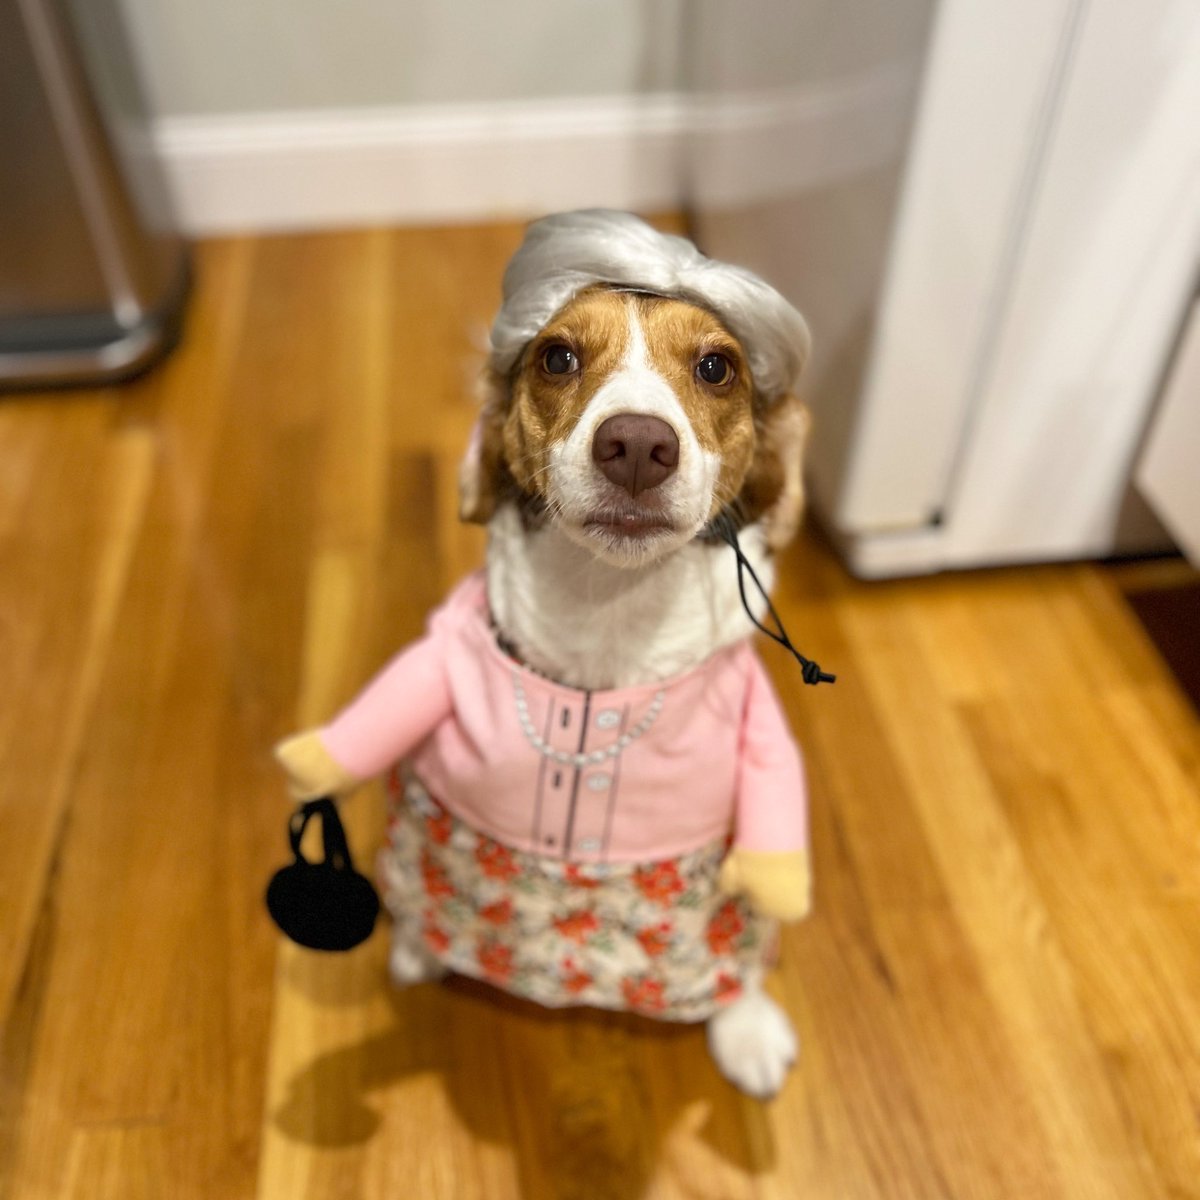 @7News Franny is a three legged love. She was a granny for Halloween.